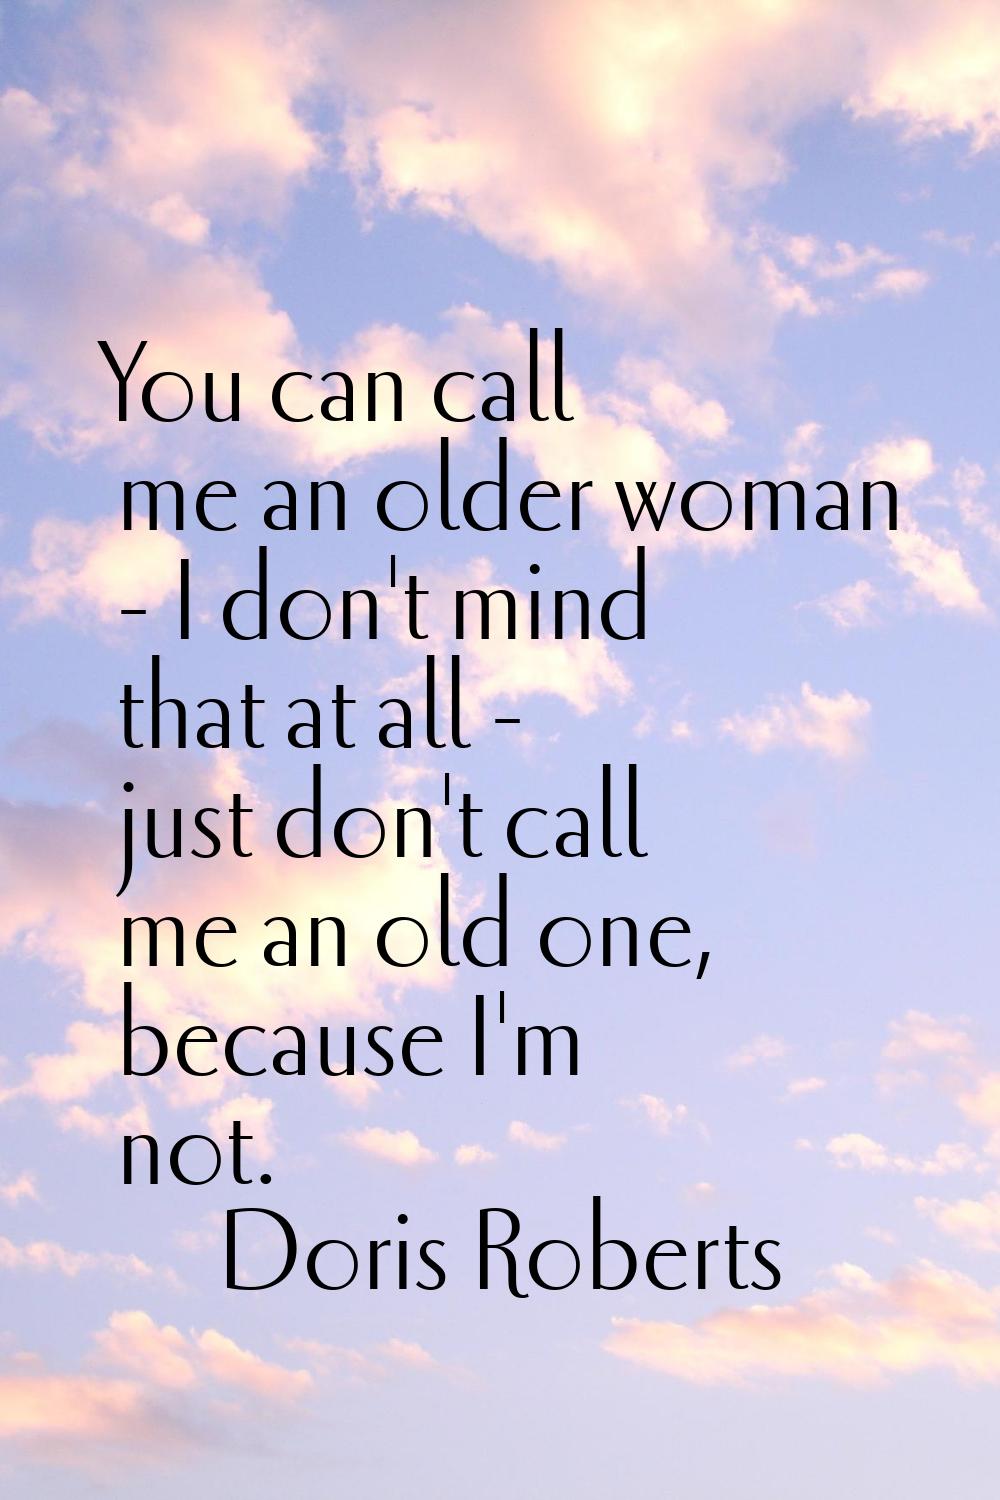 You can call me an older woman - I don't mind that at all - just don't call me an old one, because 